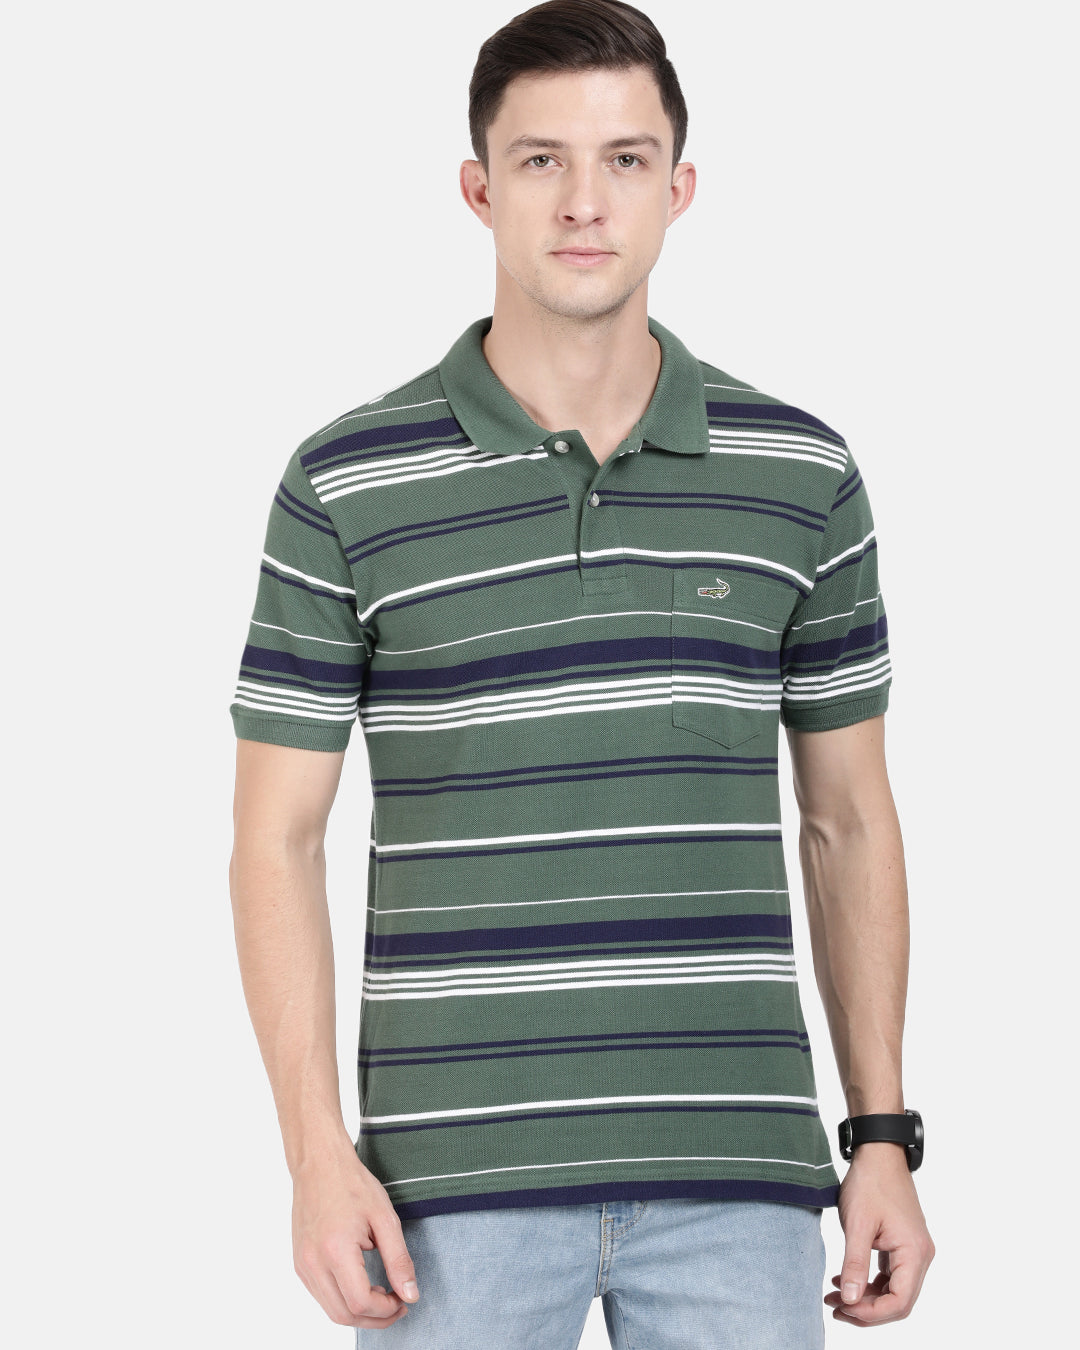 Crocodile Men's Striped Slim Fit Polo T-shirt with Patch Pocket